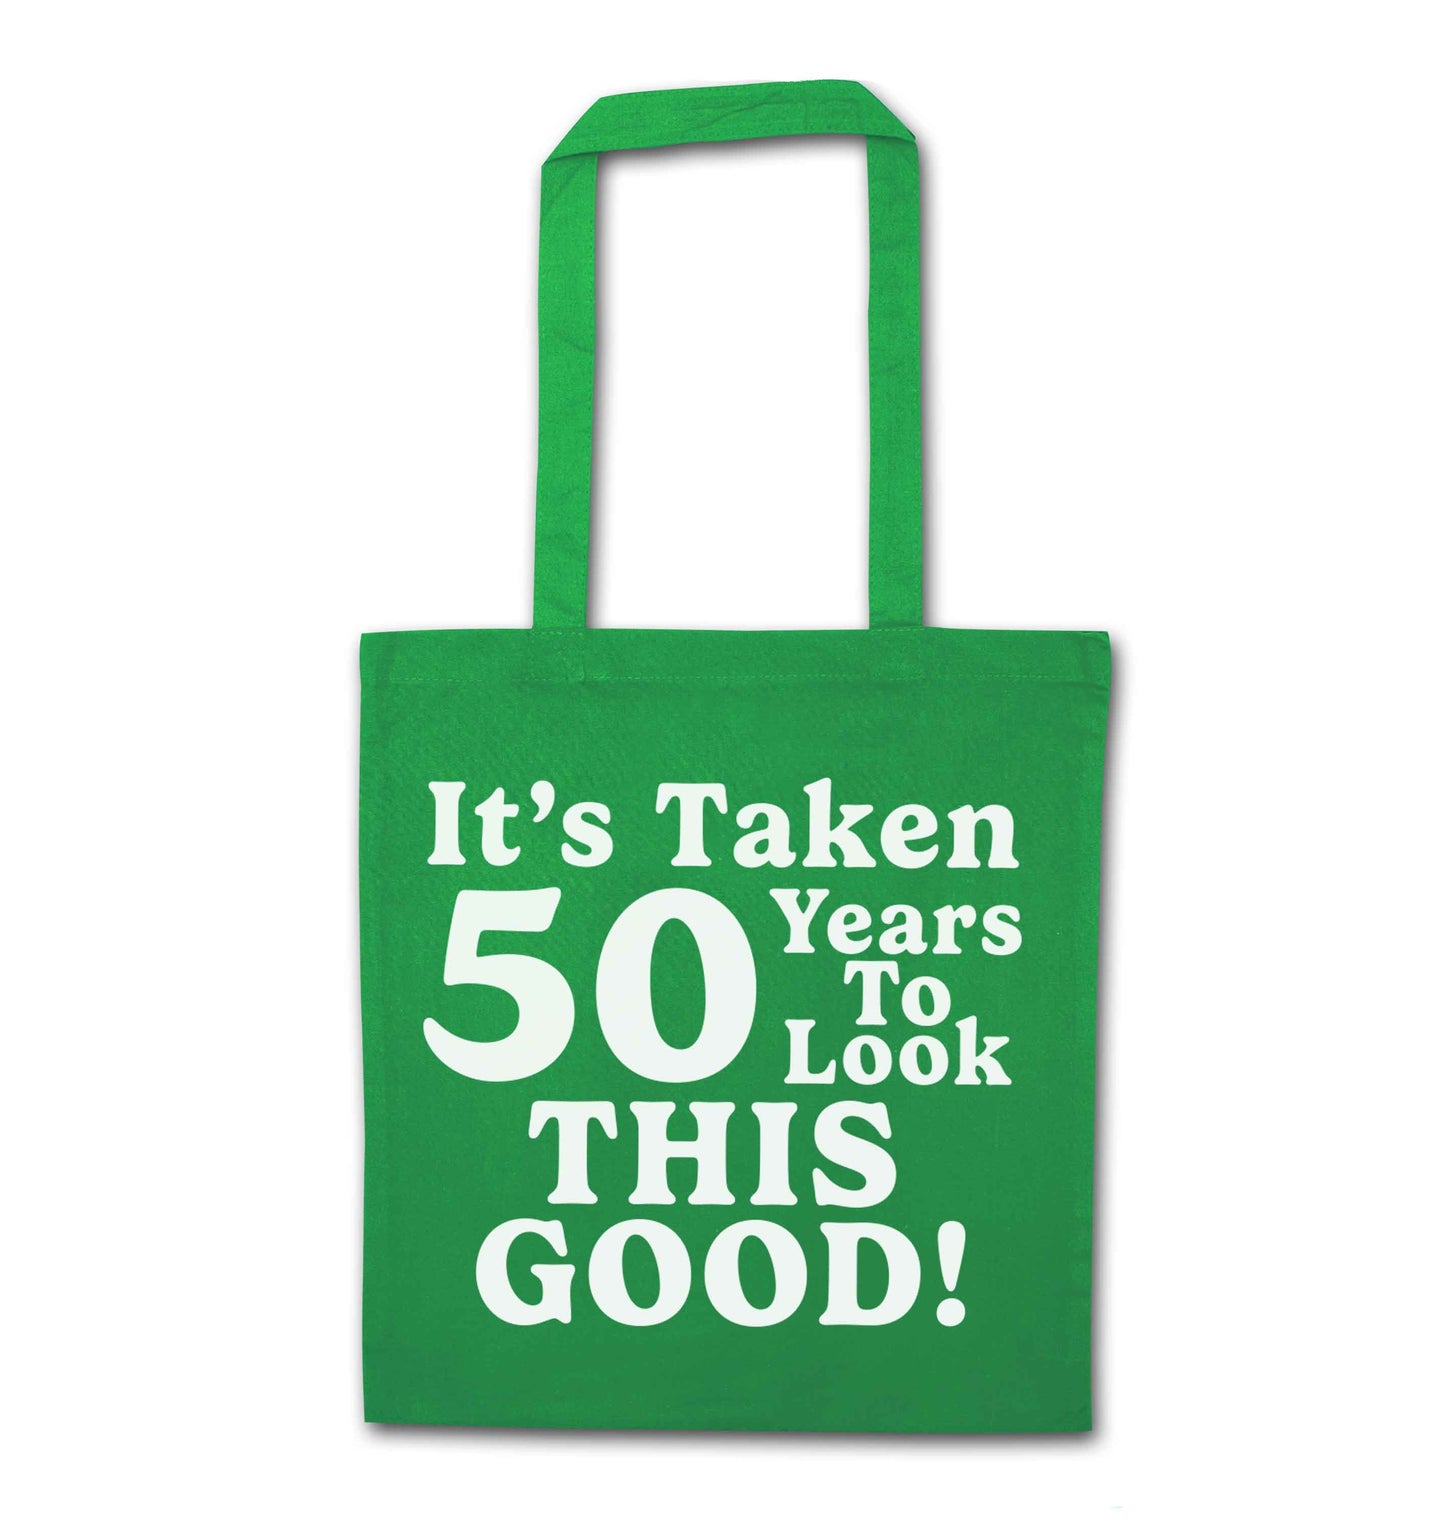 It's taken 50 years to look this good! green tote bag